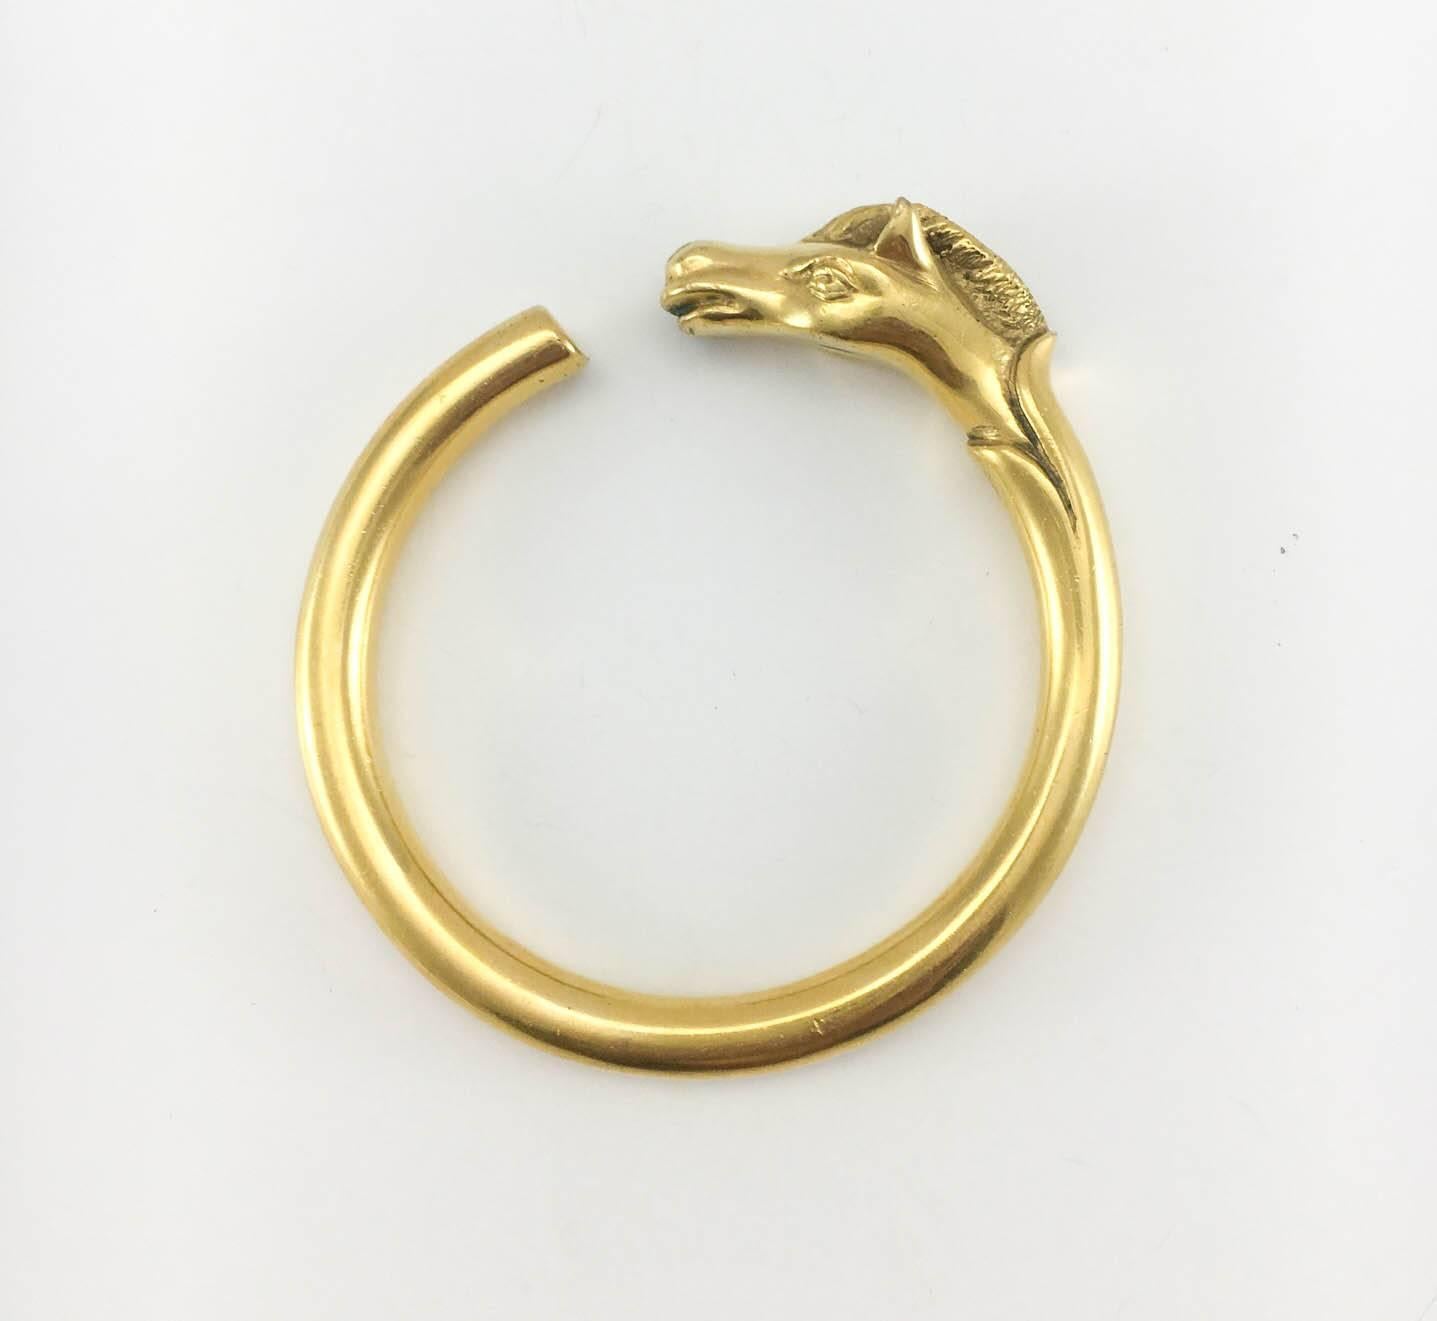 Hermes Gold-Plated Horse Head Bangle - 1980s In Excellent Condition In London, Chelsea